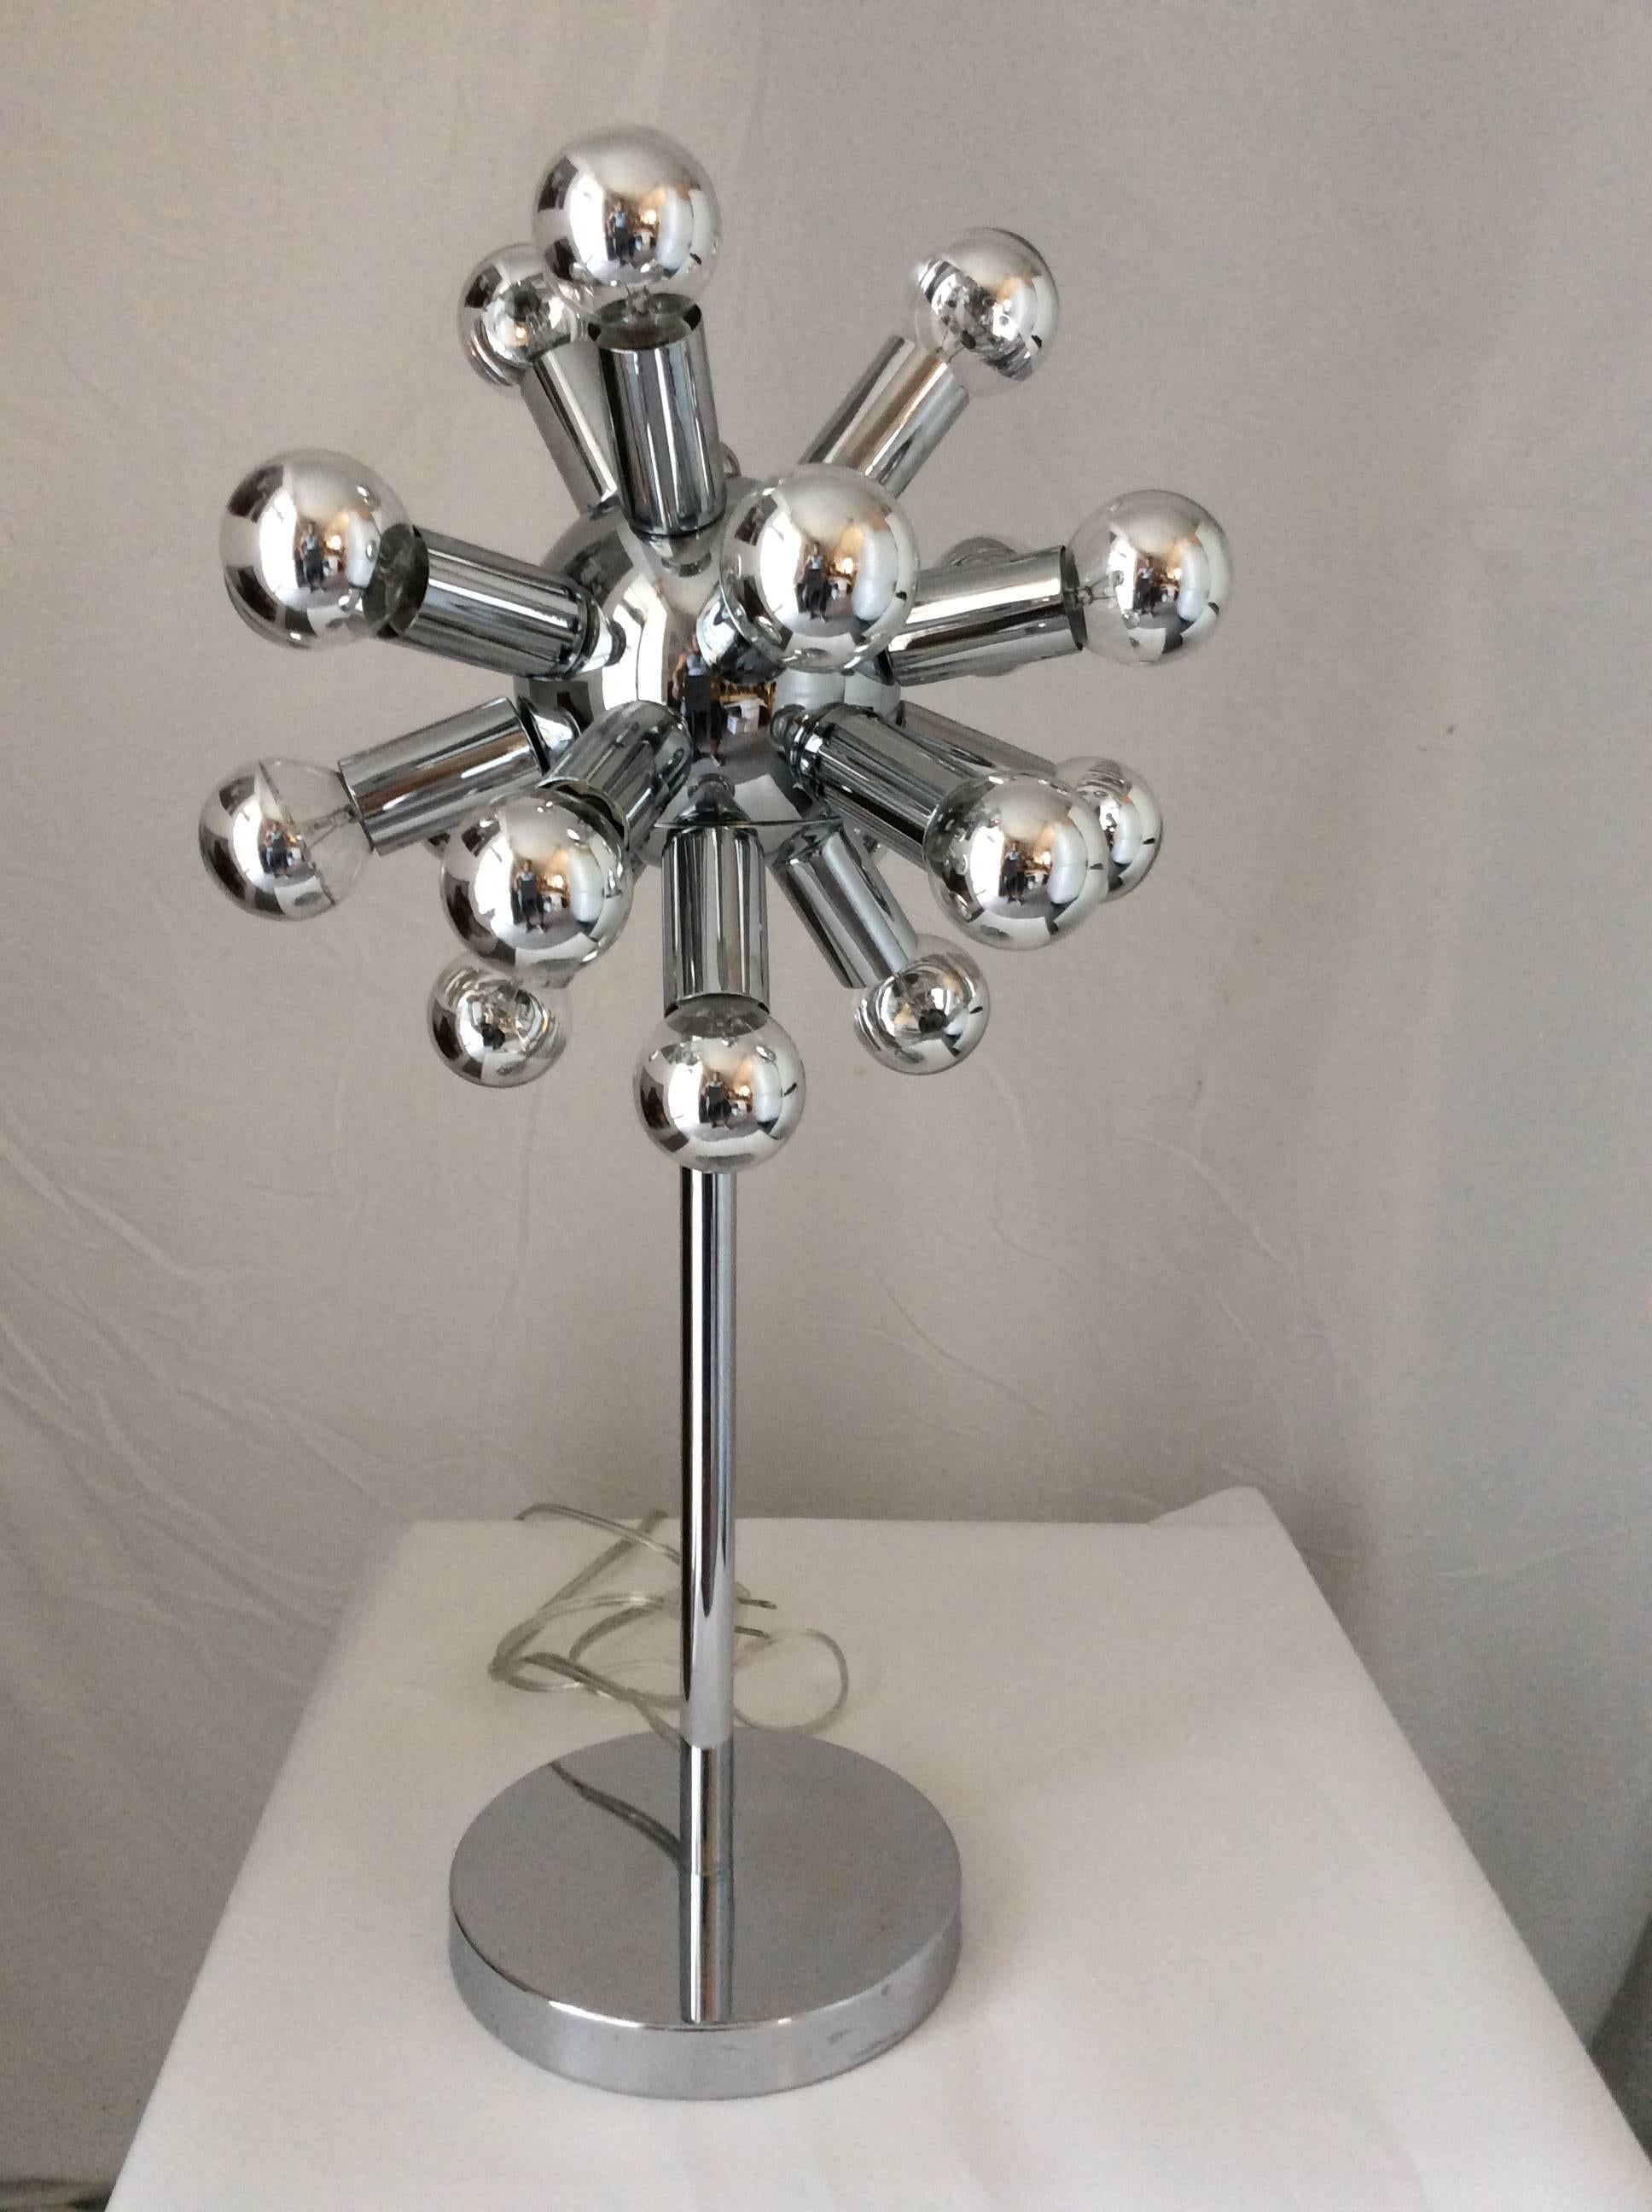 Pair of Mid-Century Modern American Chrome Sputnik Table Lamps, Torino Style In Good Condition For Sale In Miami, FL